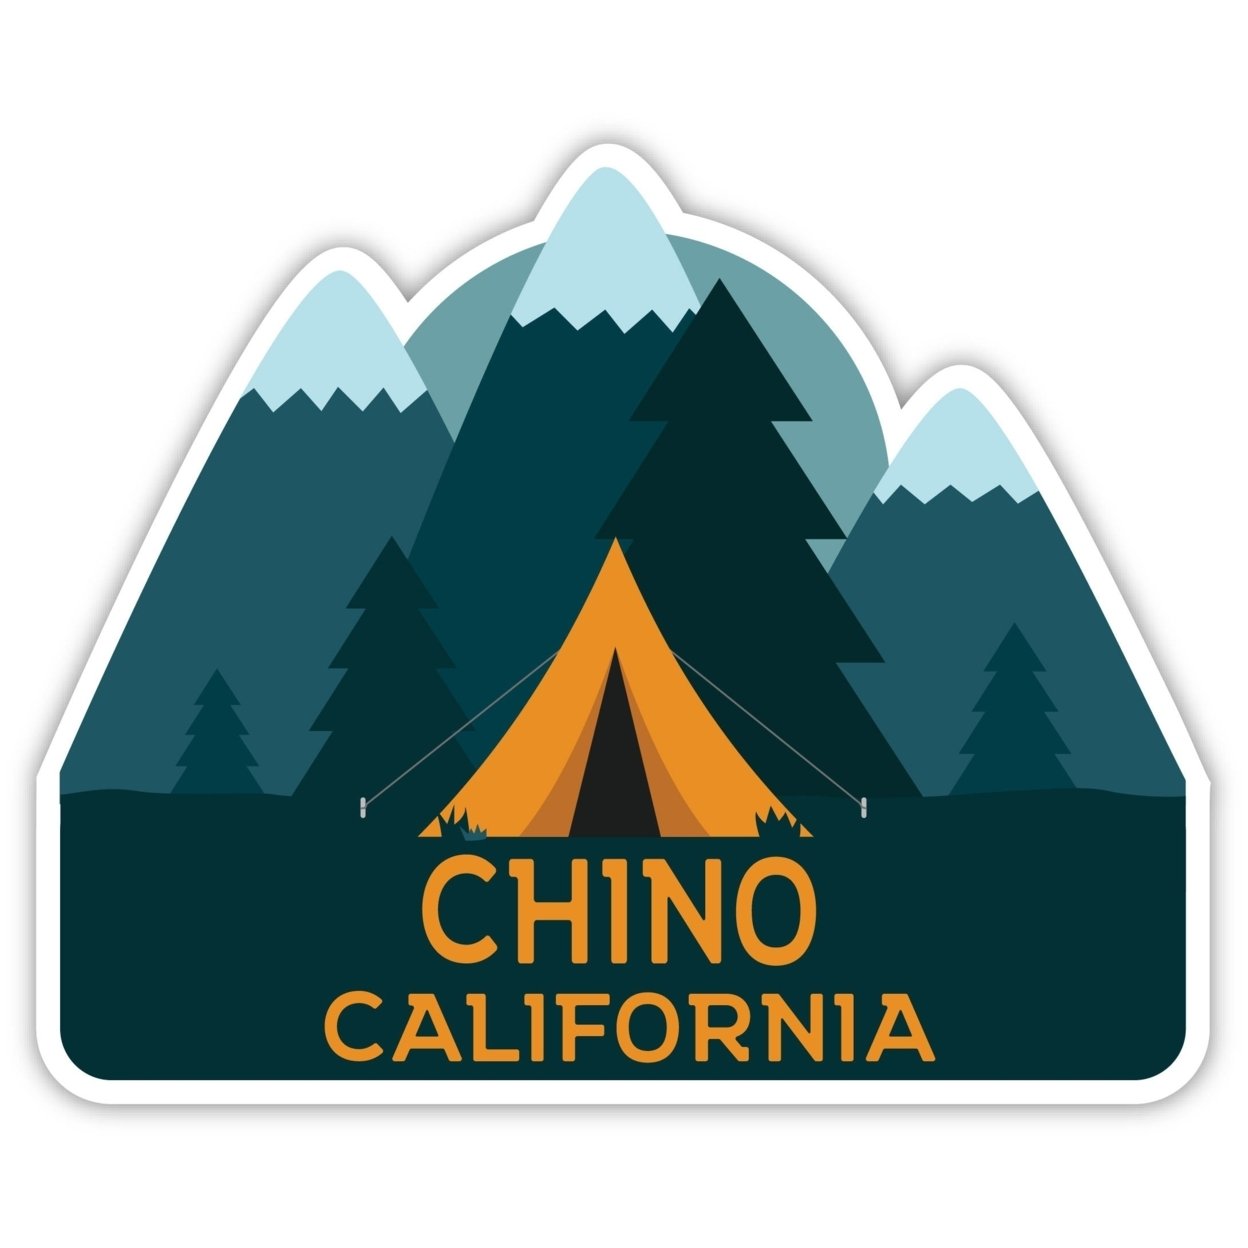 Chino California Souvenir Decorative Stickers (Choose Theme And Size) - 4-Pack, 6-Inch, Tent